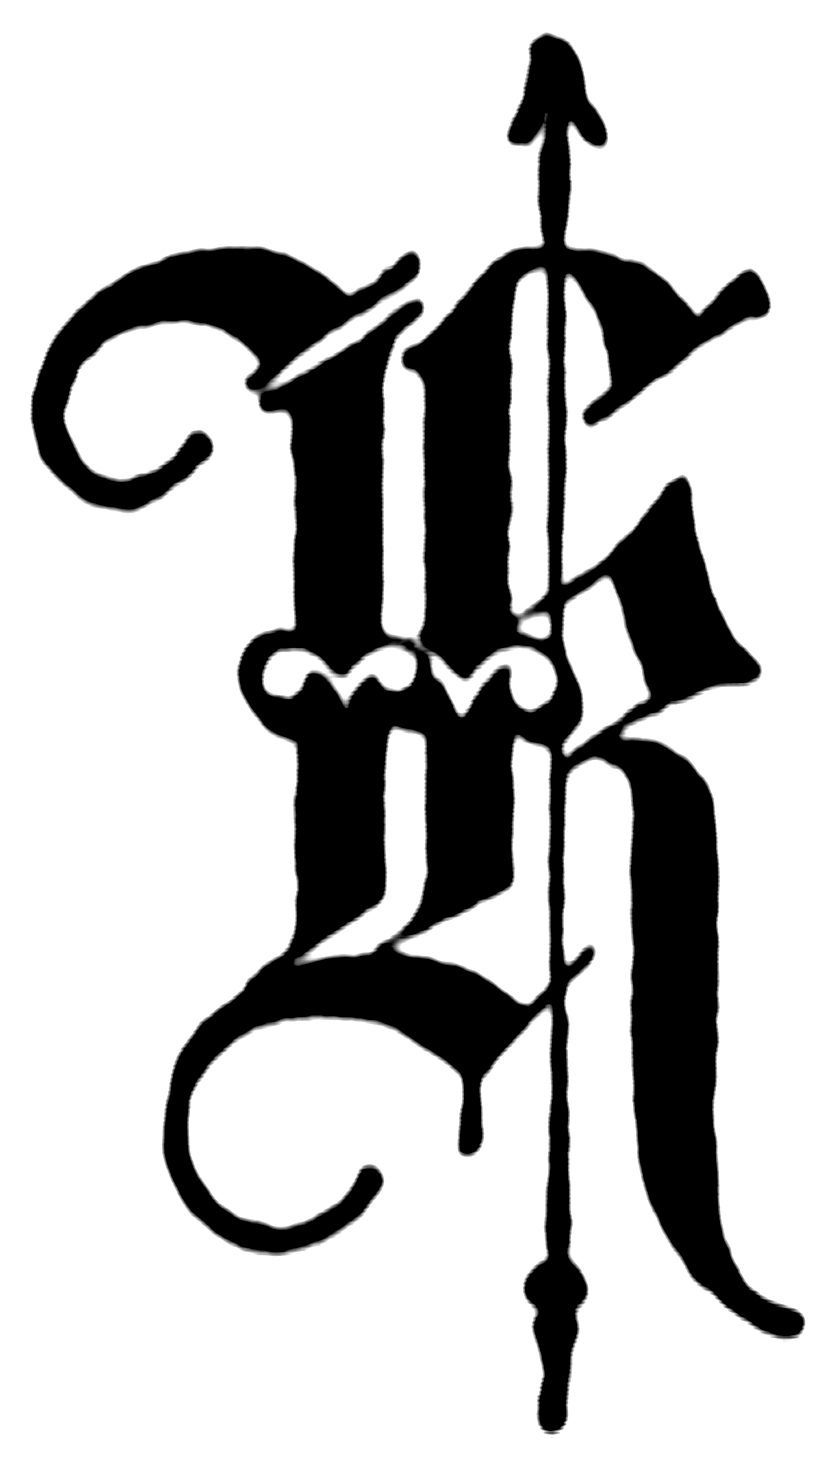 K, Old English fancy text | ClipArt ETC